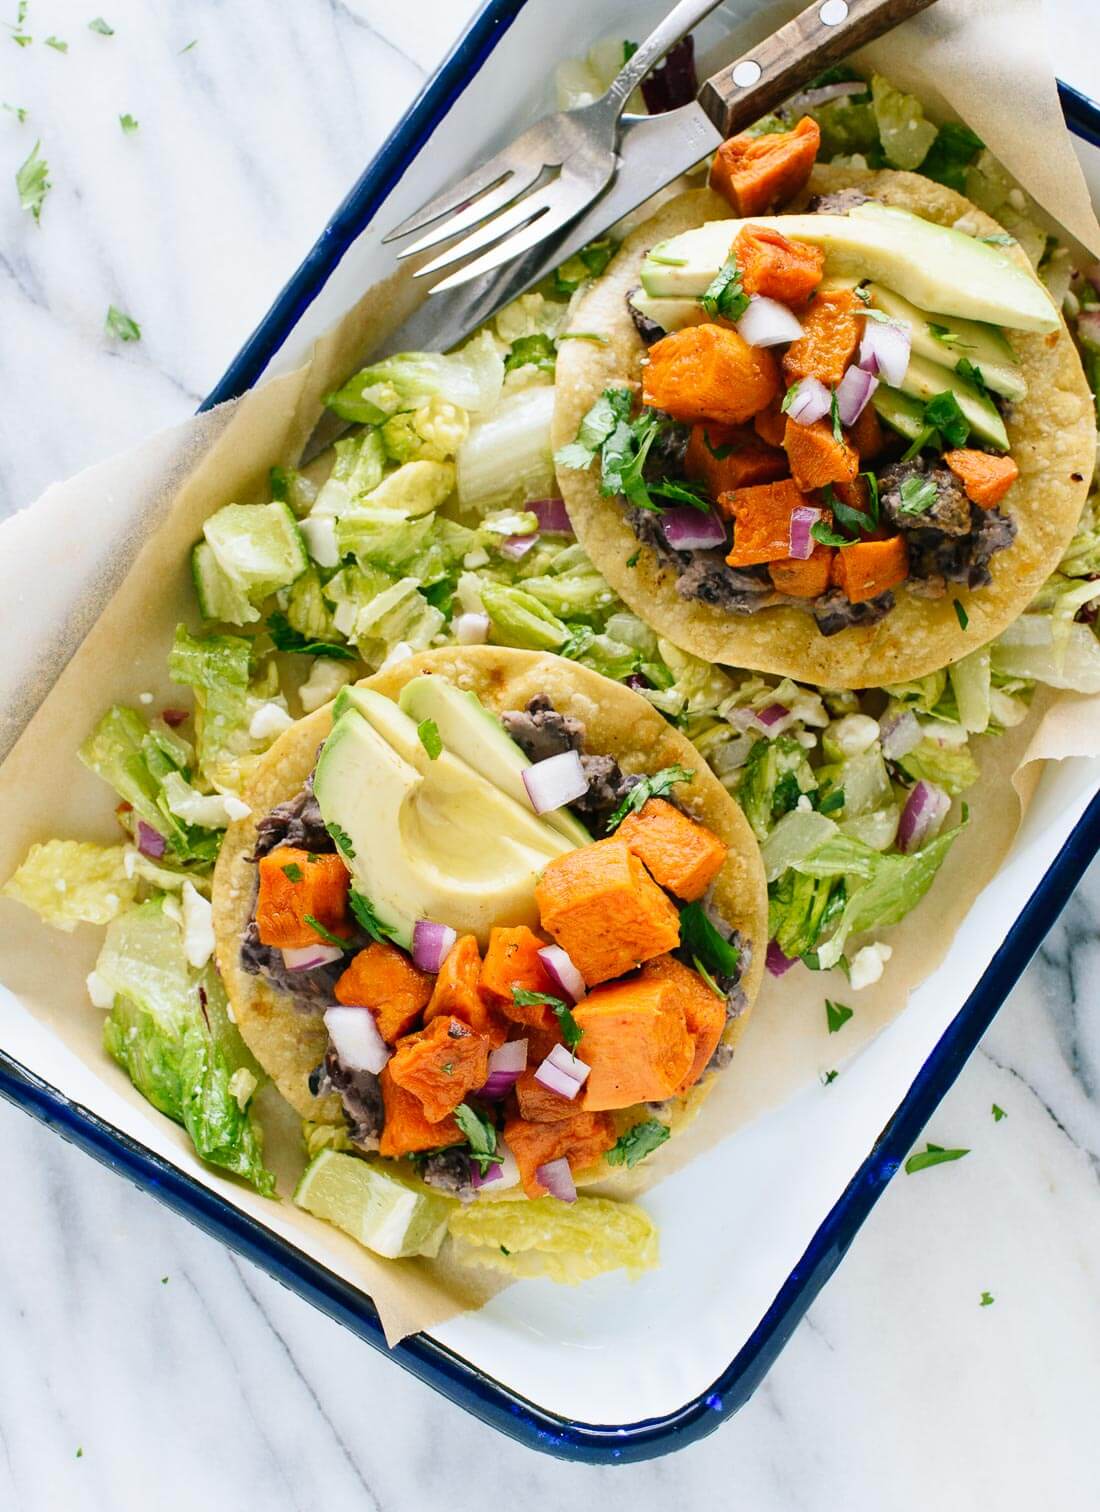 This vegetarian tostadas recipe features roasted sweet potatoes and healthy "refried" black beans, served on a crisp salad. Gluten free and easily vegan!